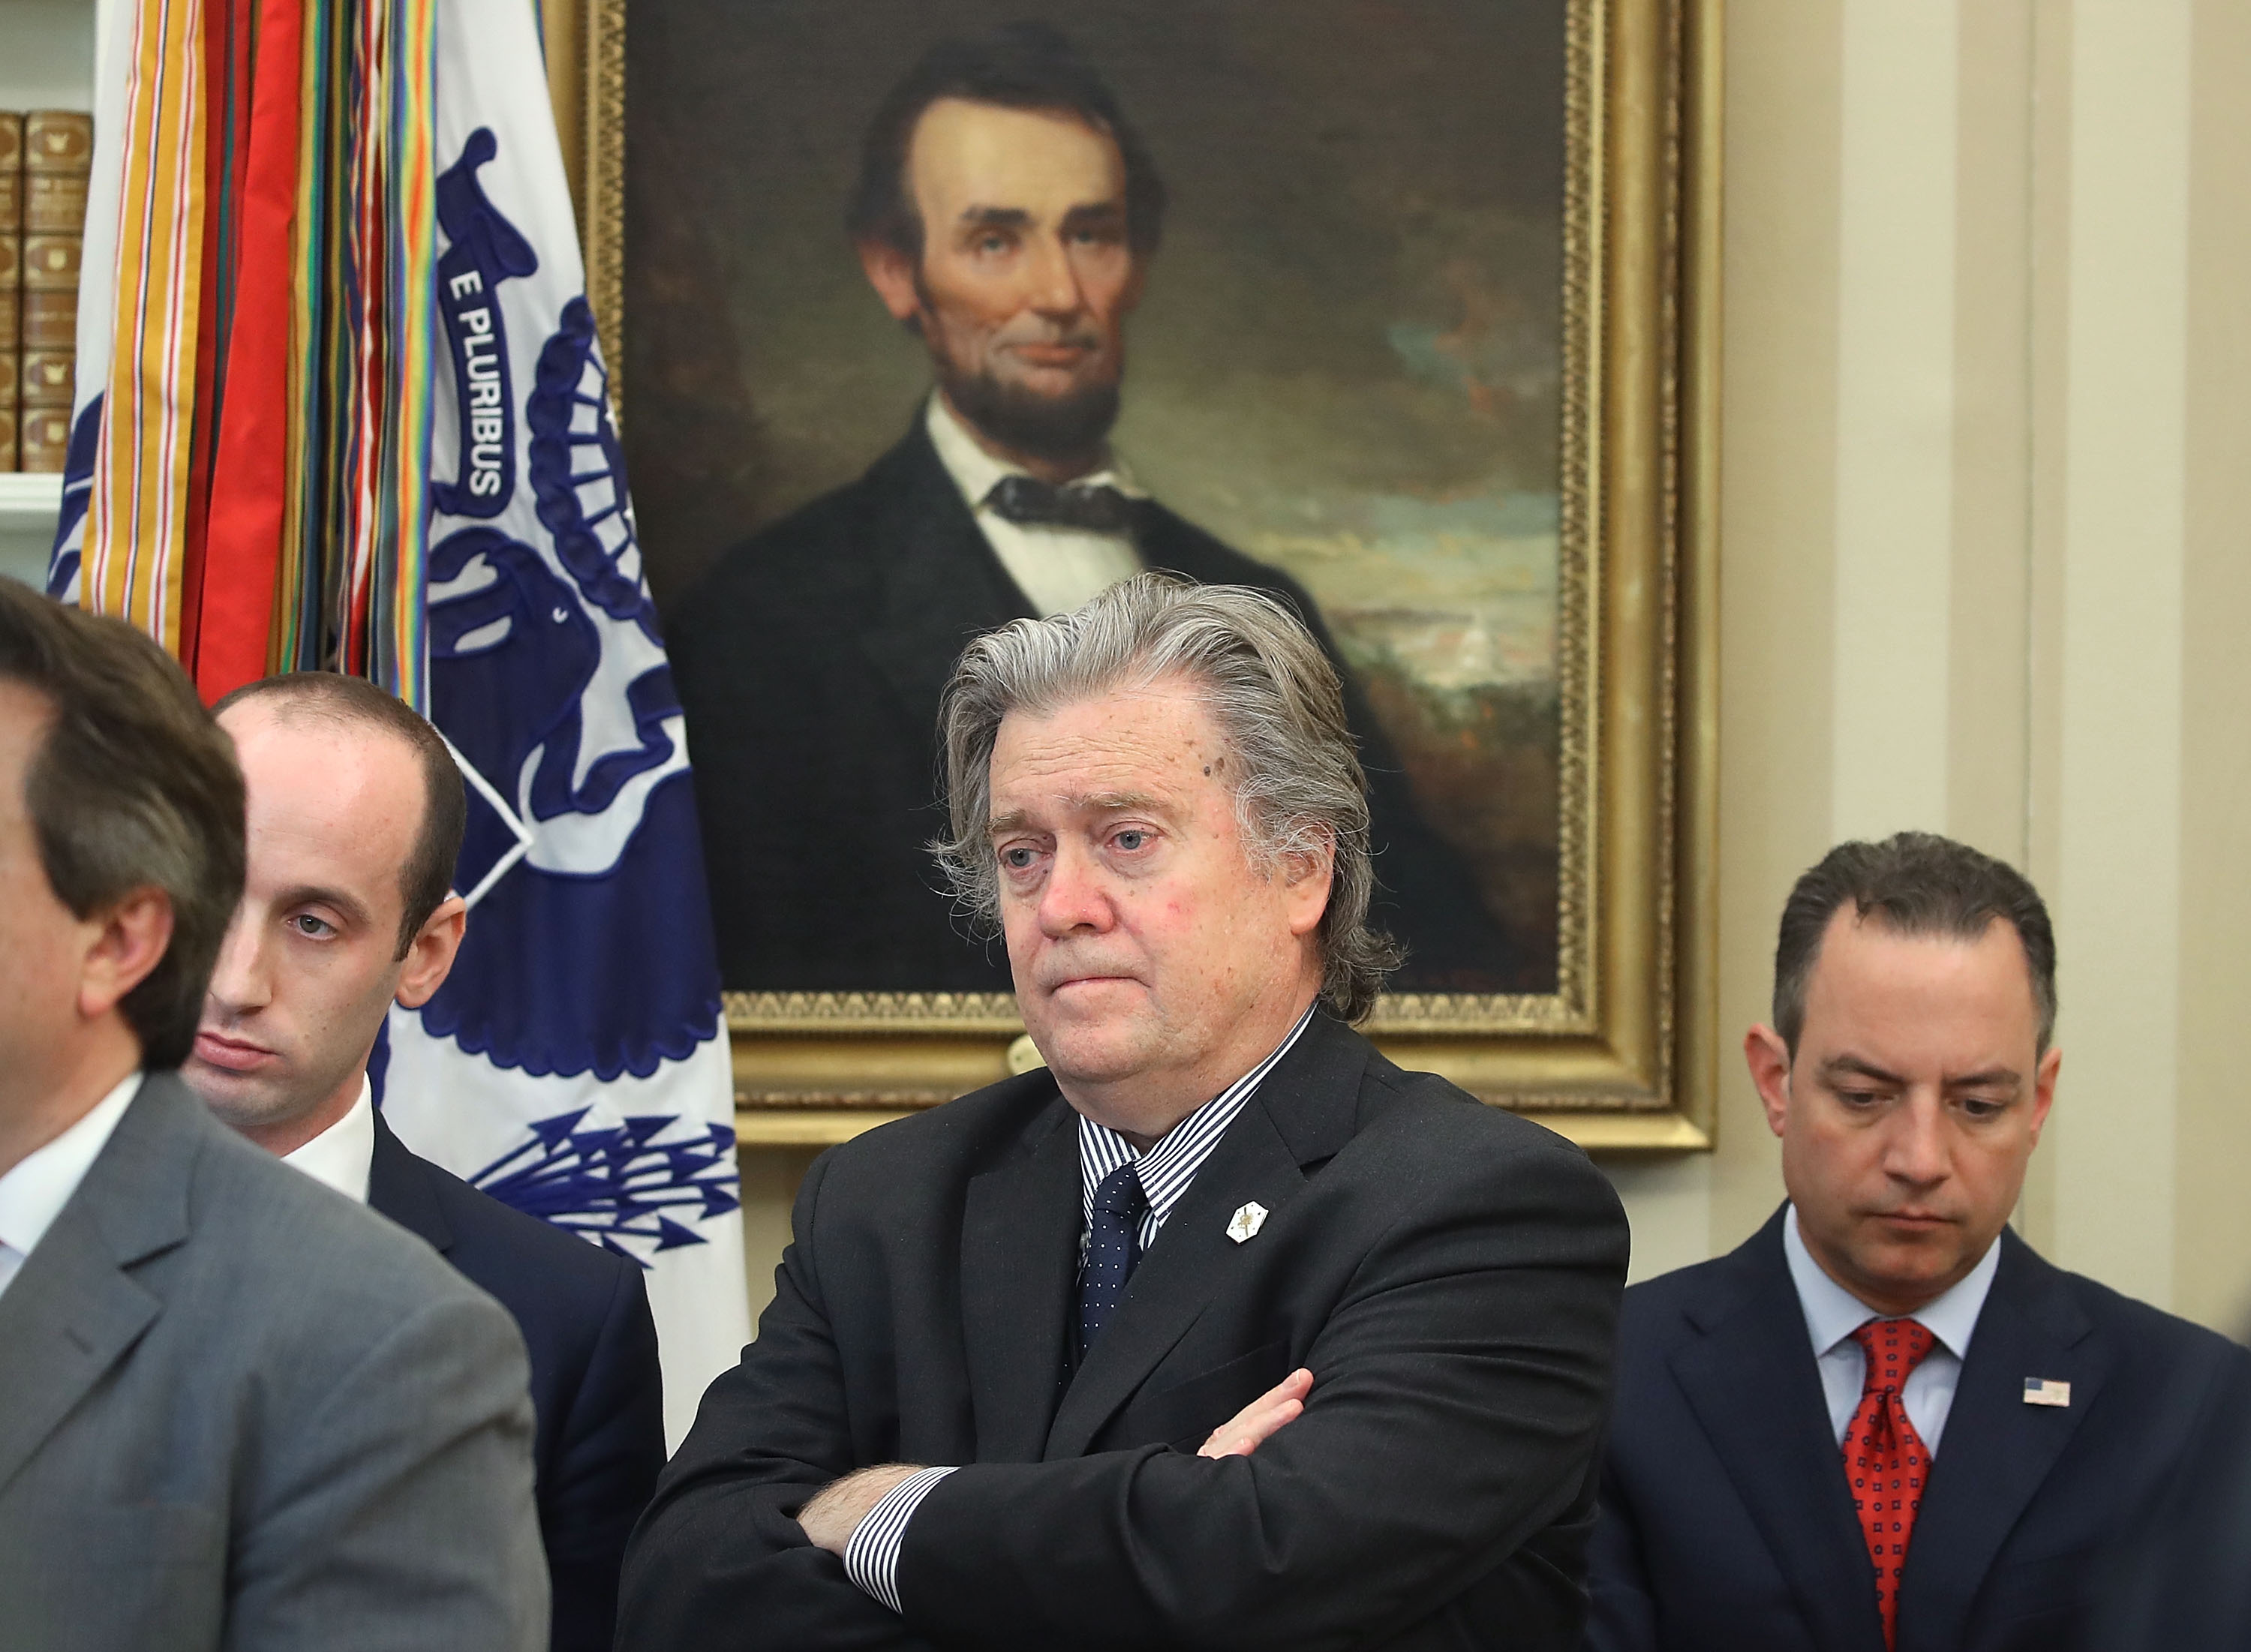 Stephen Bannon gave two surprising interviews while his job is on the line.